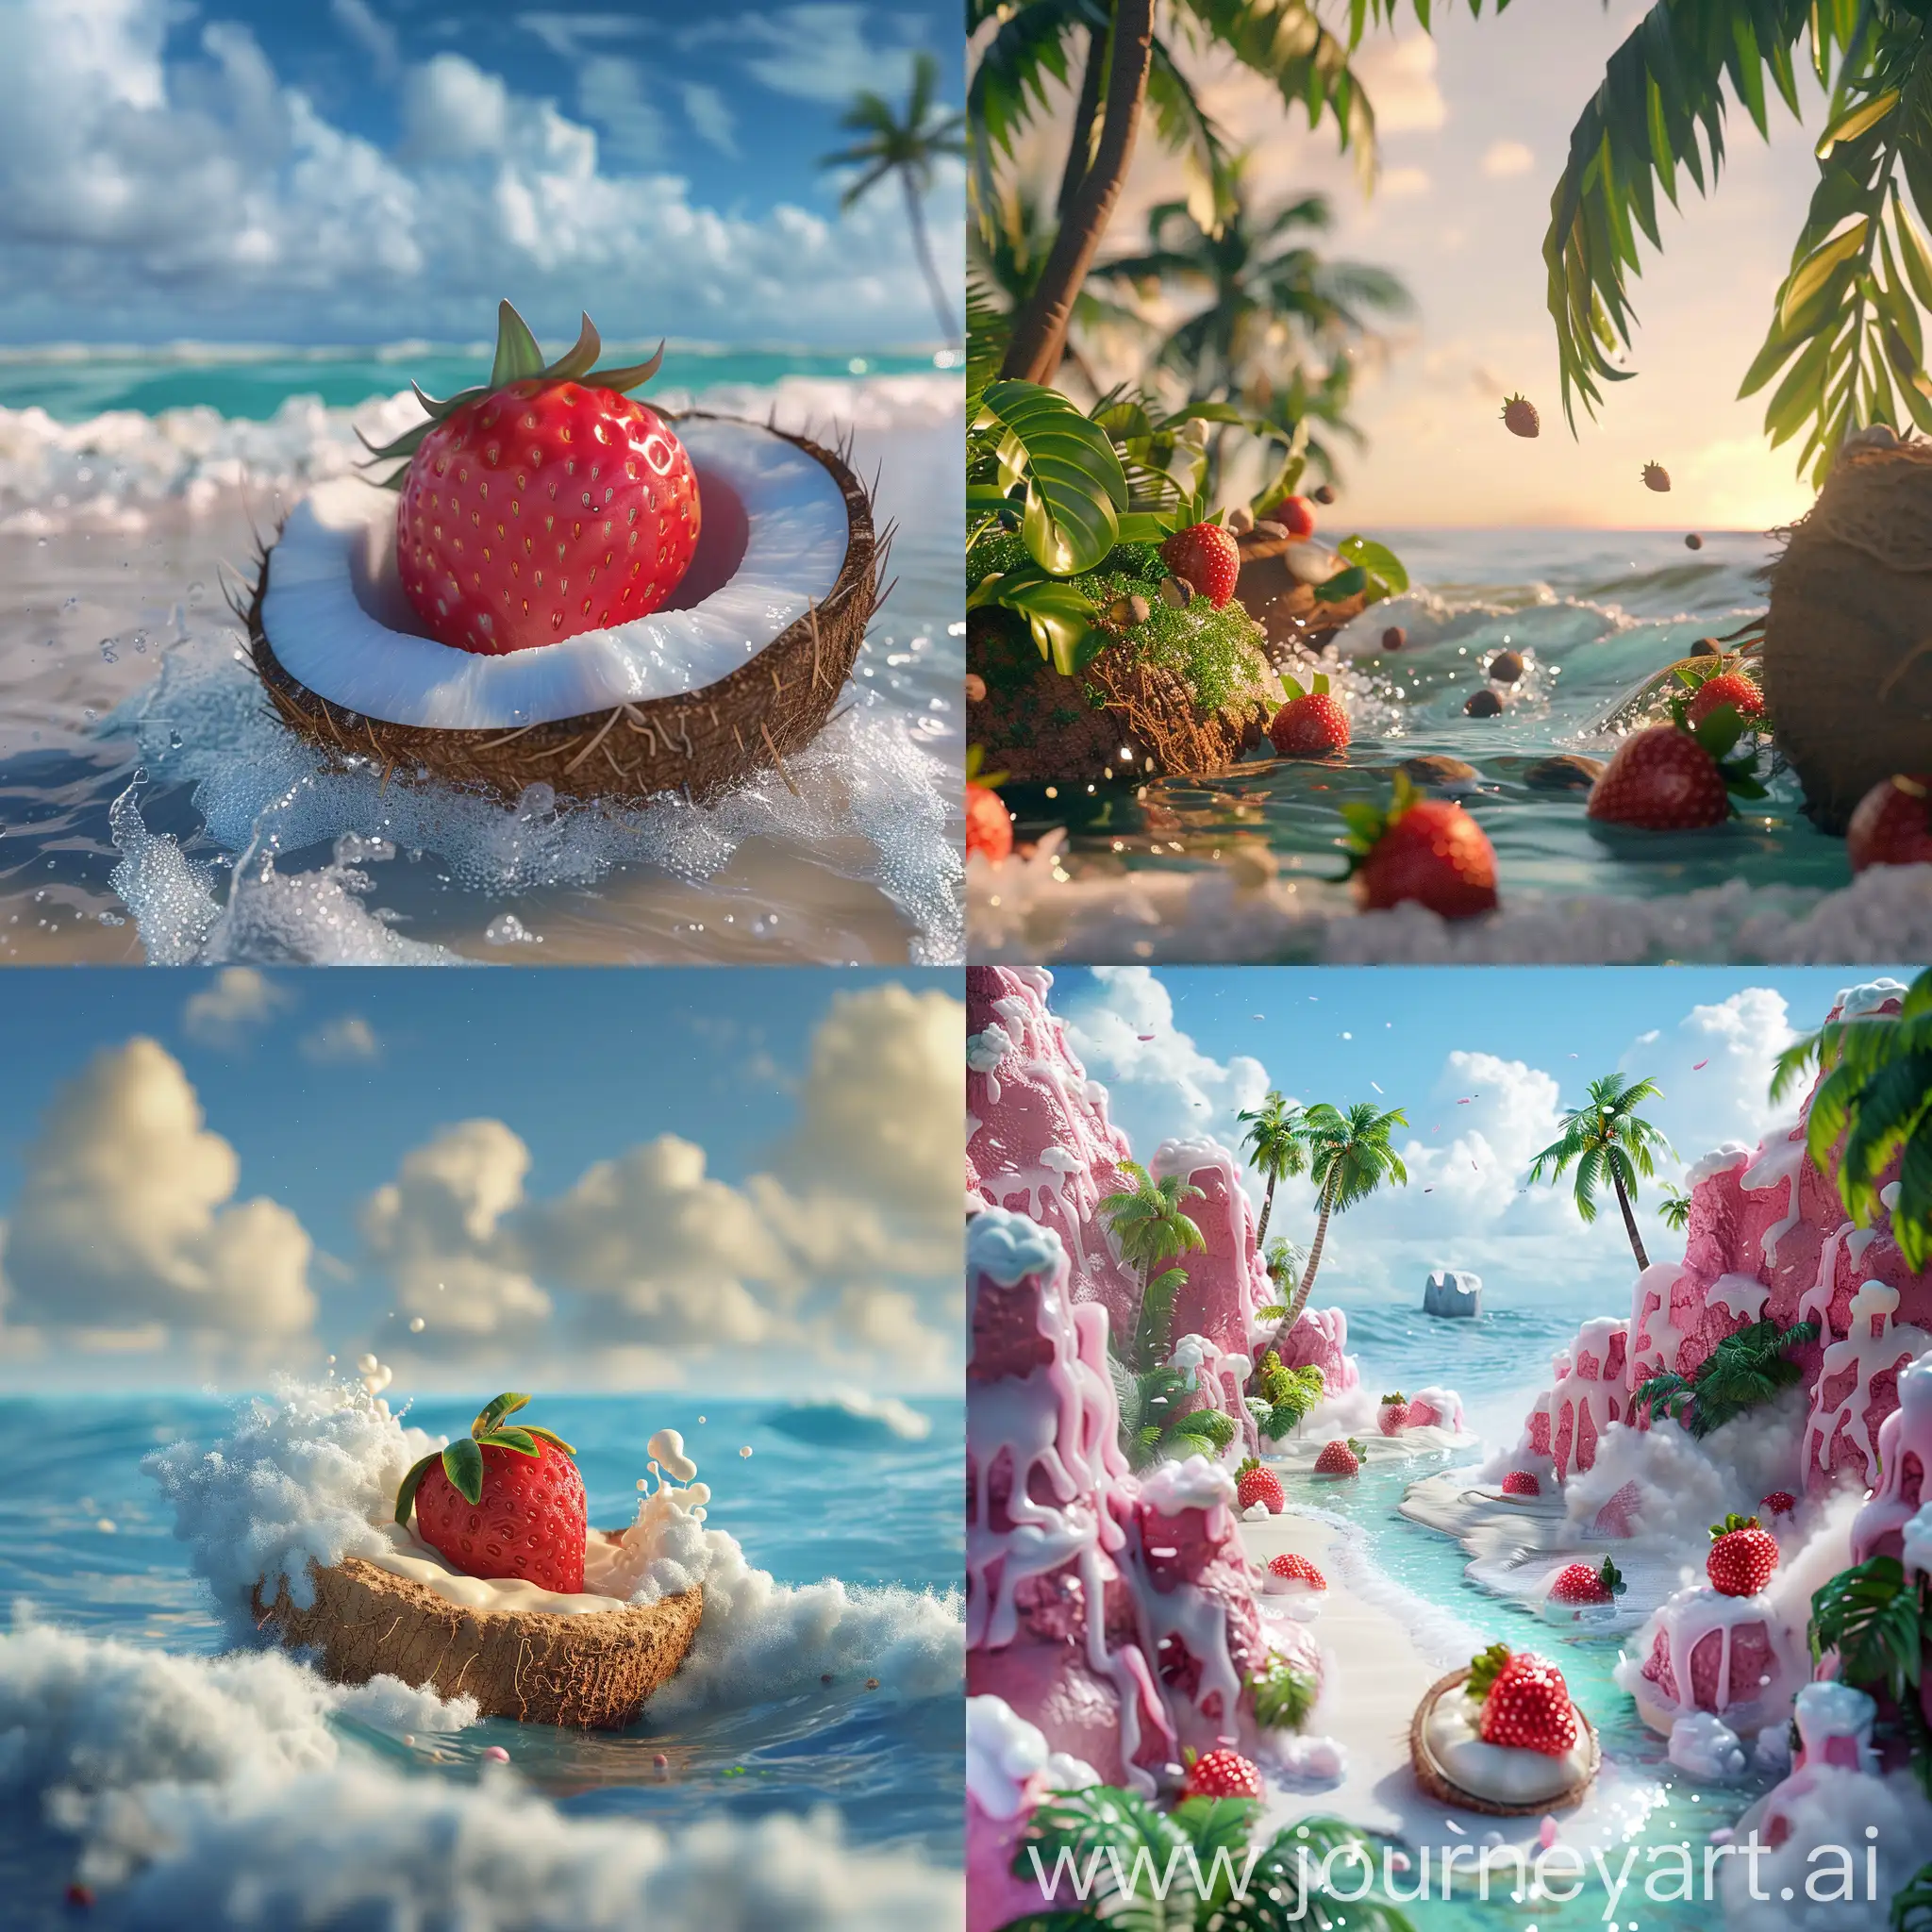 Tropical-Dessert-Delights-Coconut-and-Strawberry-on-Ocean-Waves-in-3D-Animation